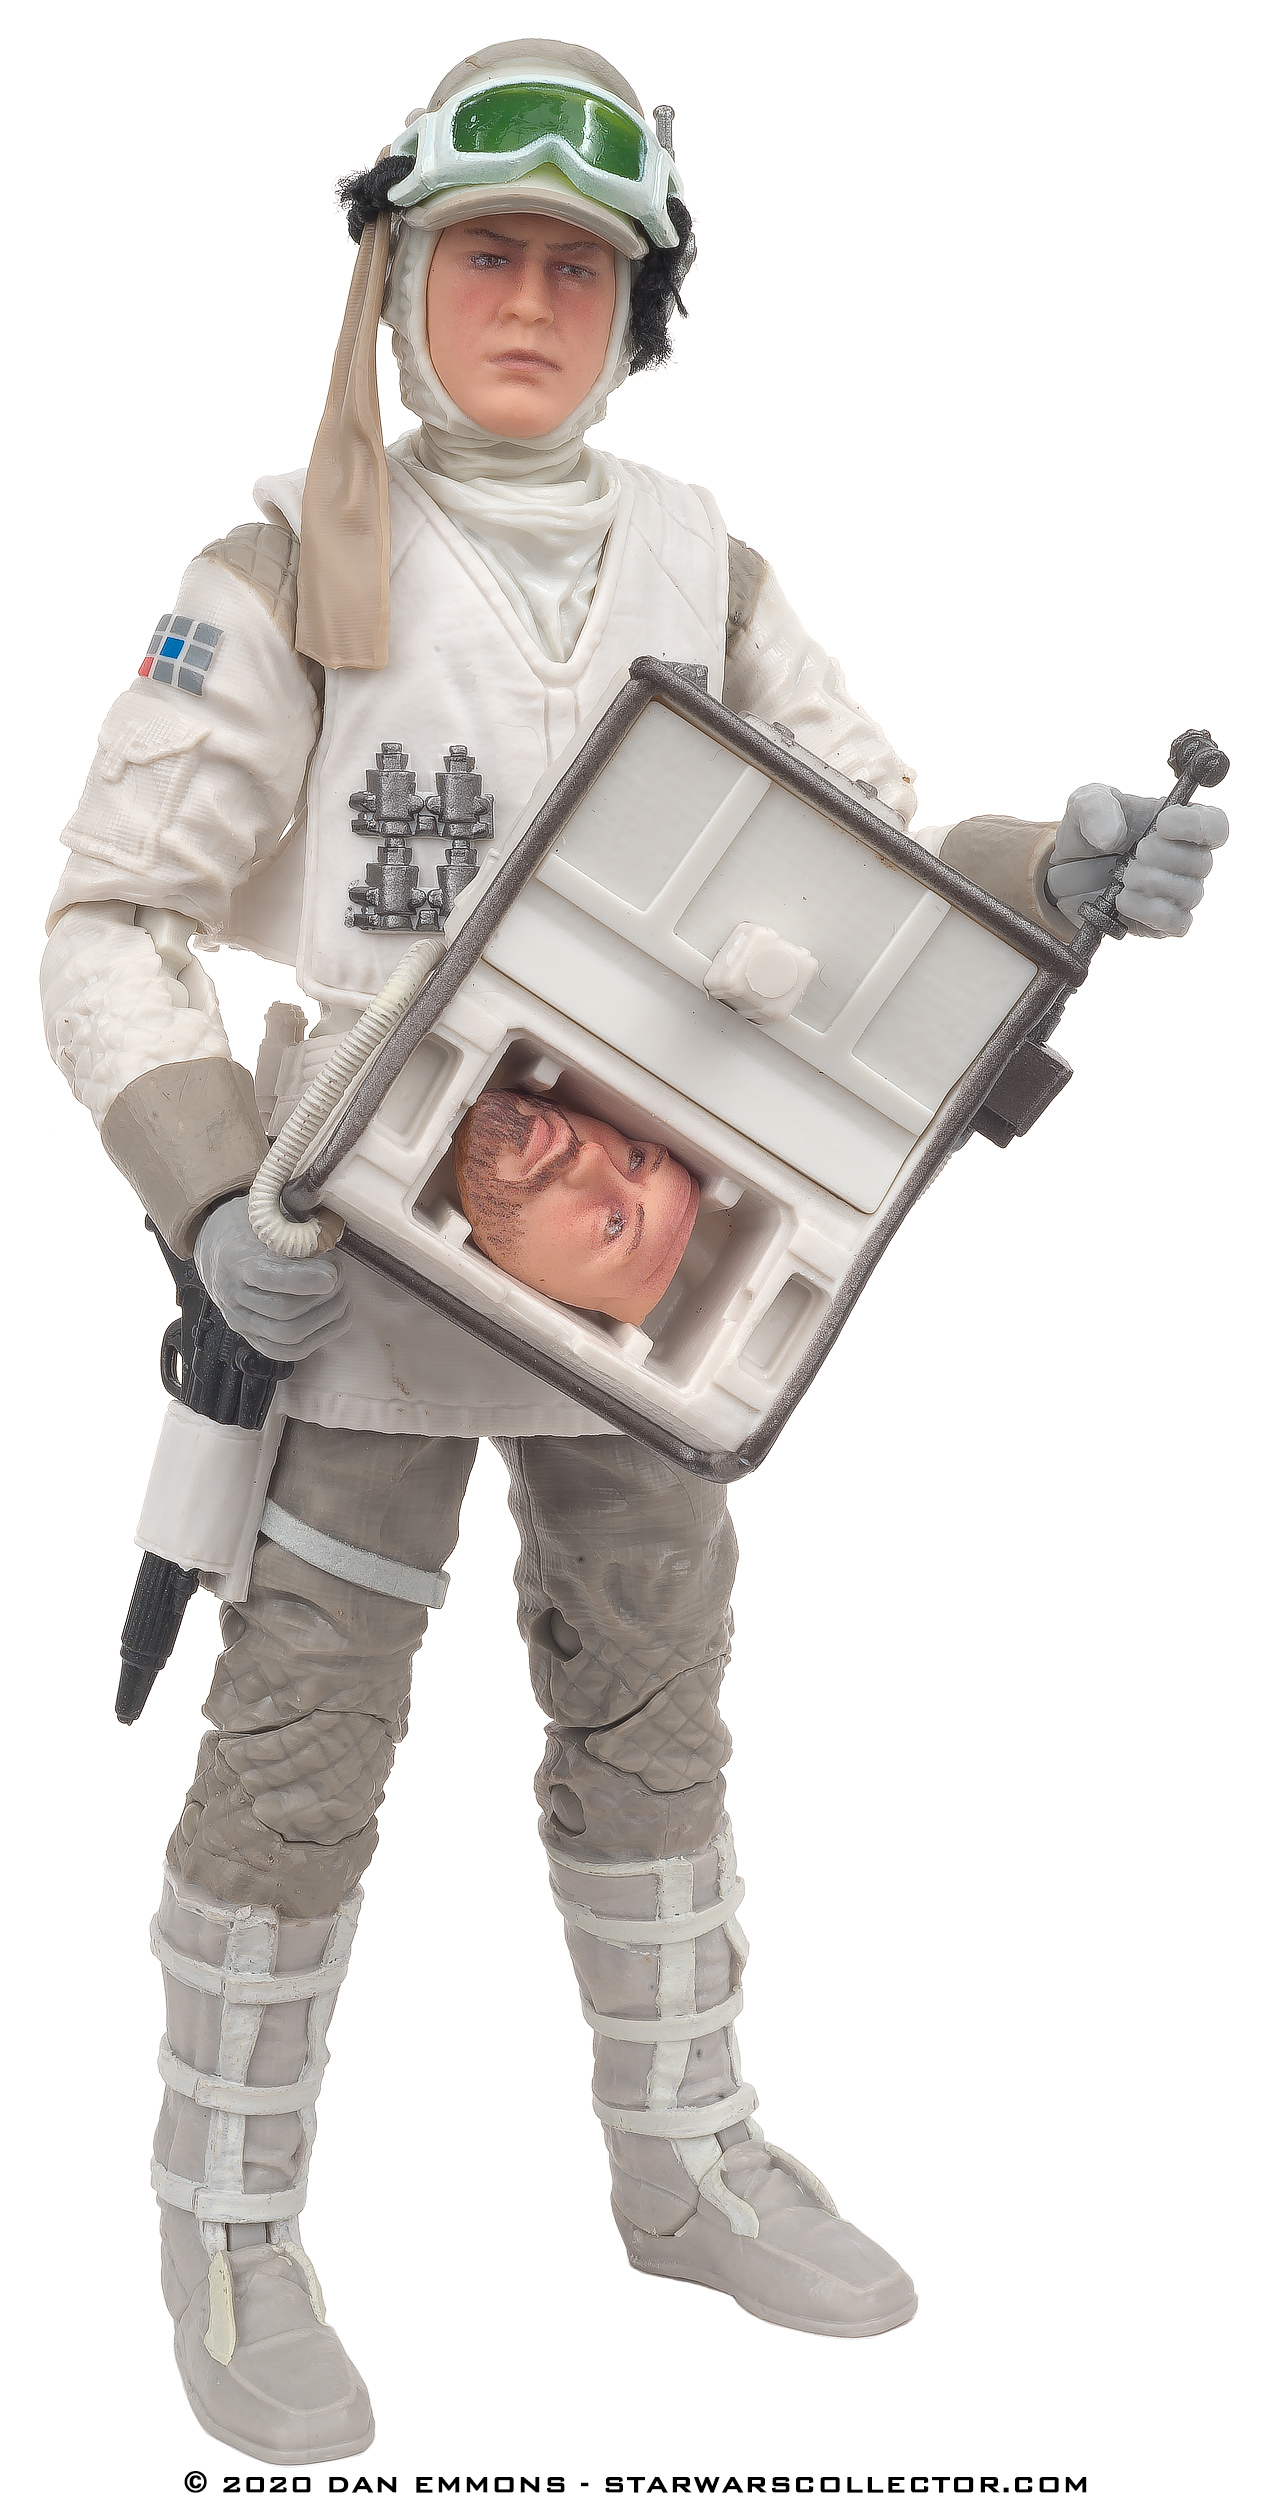 The Black Series 40th Anniversary 6-Inch Rebel Soldier (Hoth)